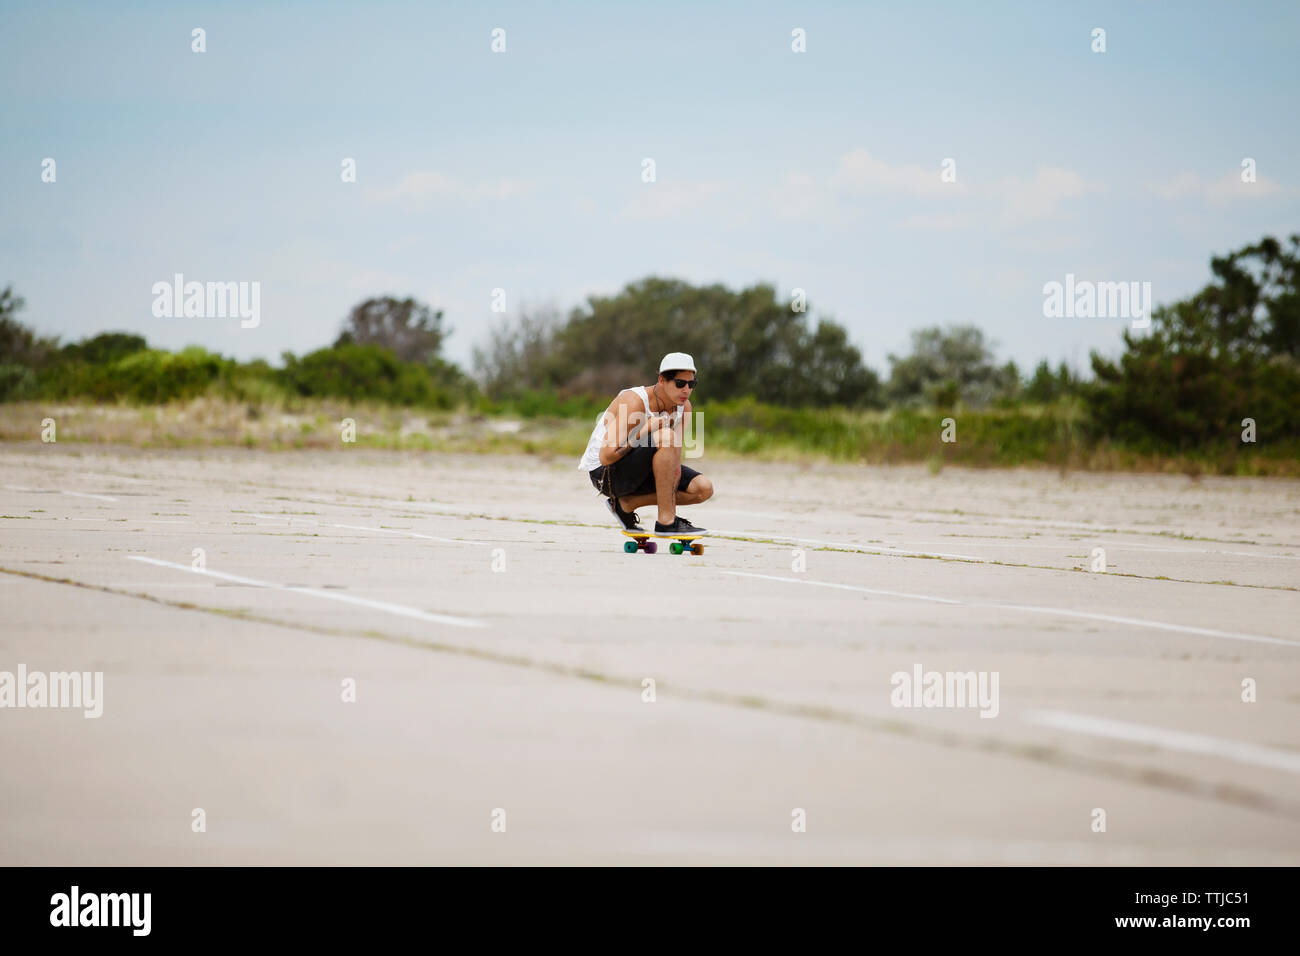 Man performing stunt on skateboard at field against sky Stock Photo